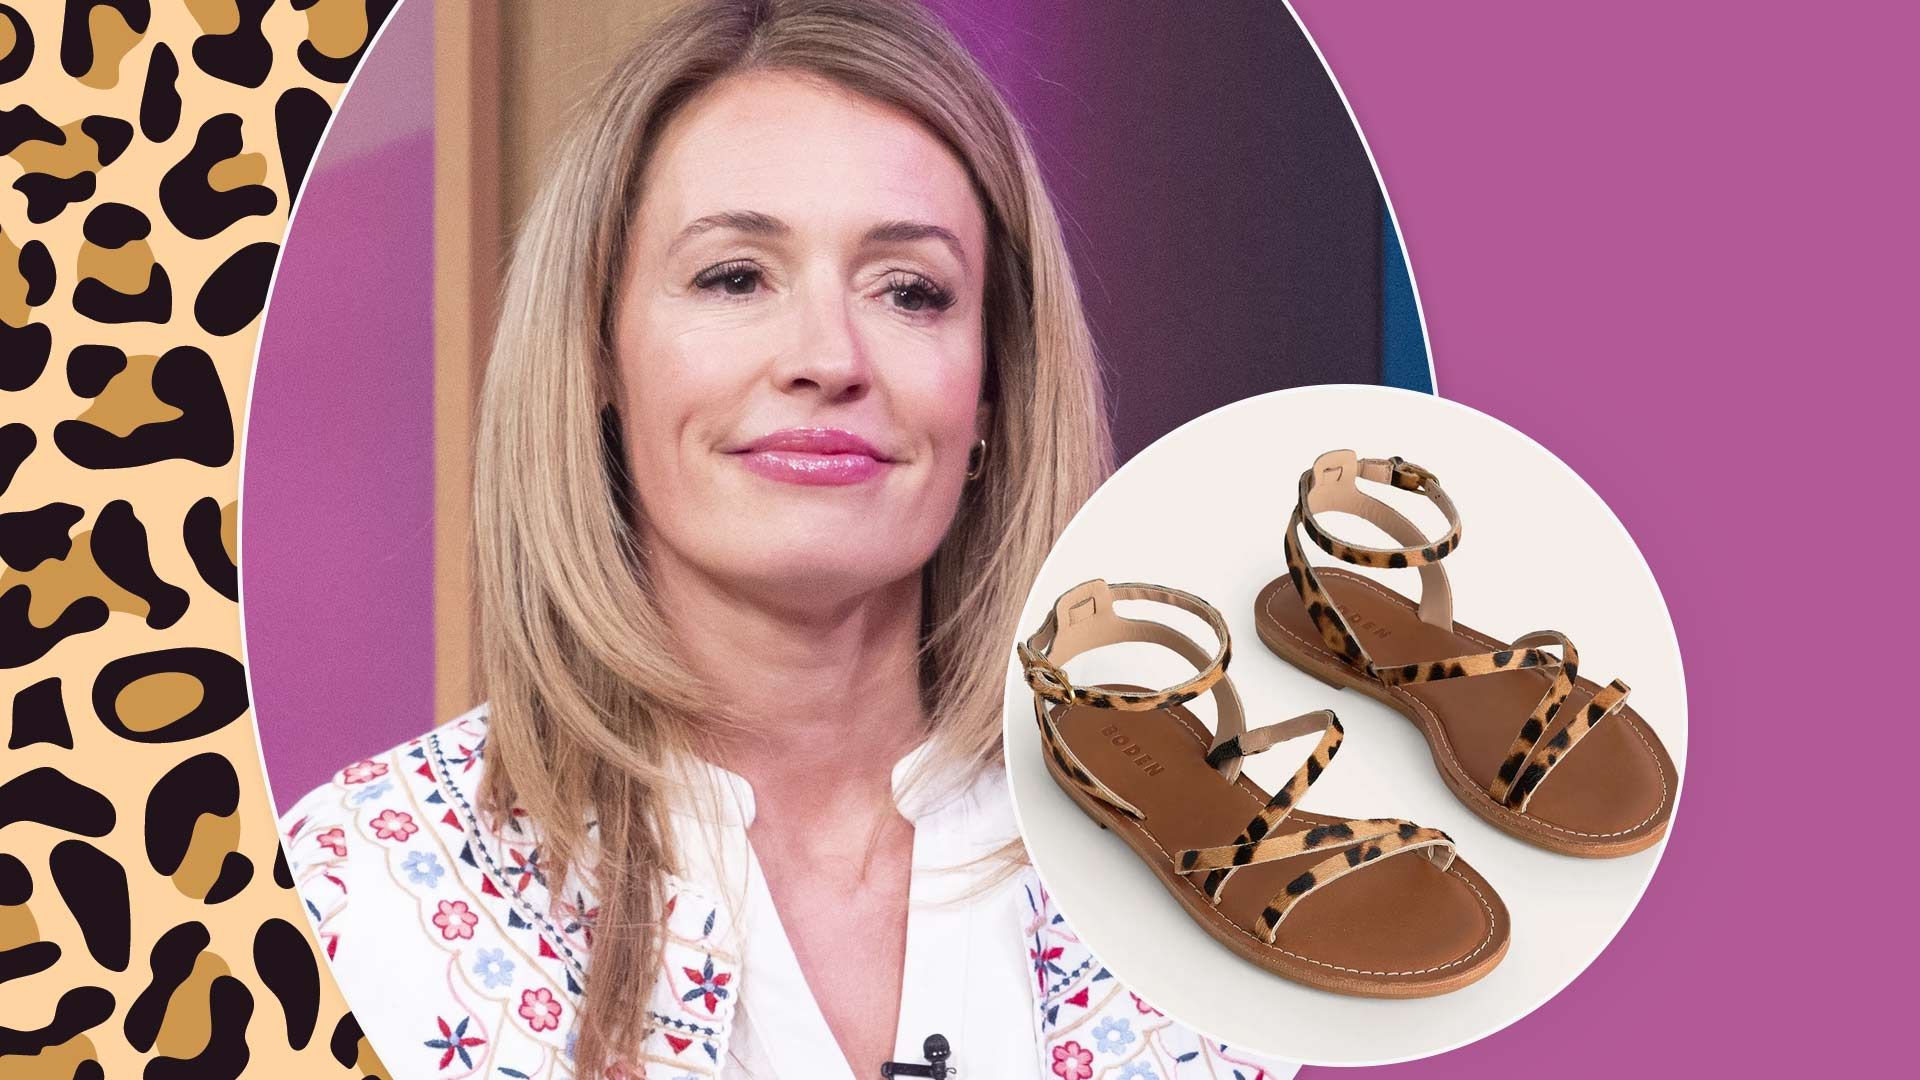 I've found Cat Deeley's strappy leopard print flat sandals and I clicked 'add to basket' immediately